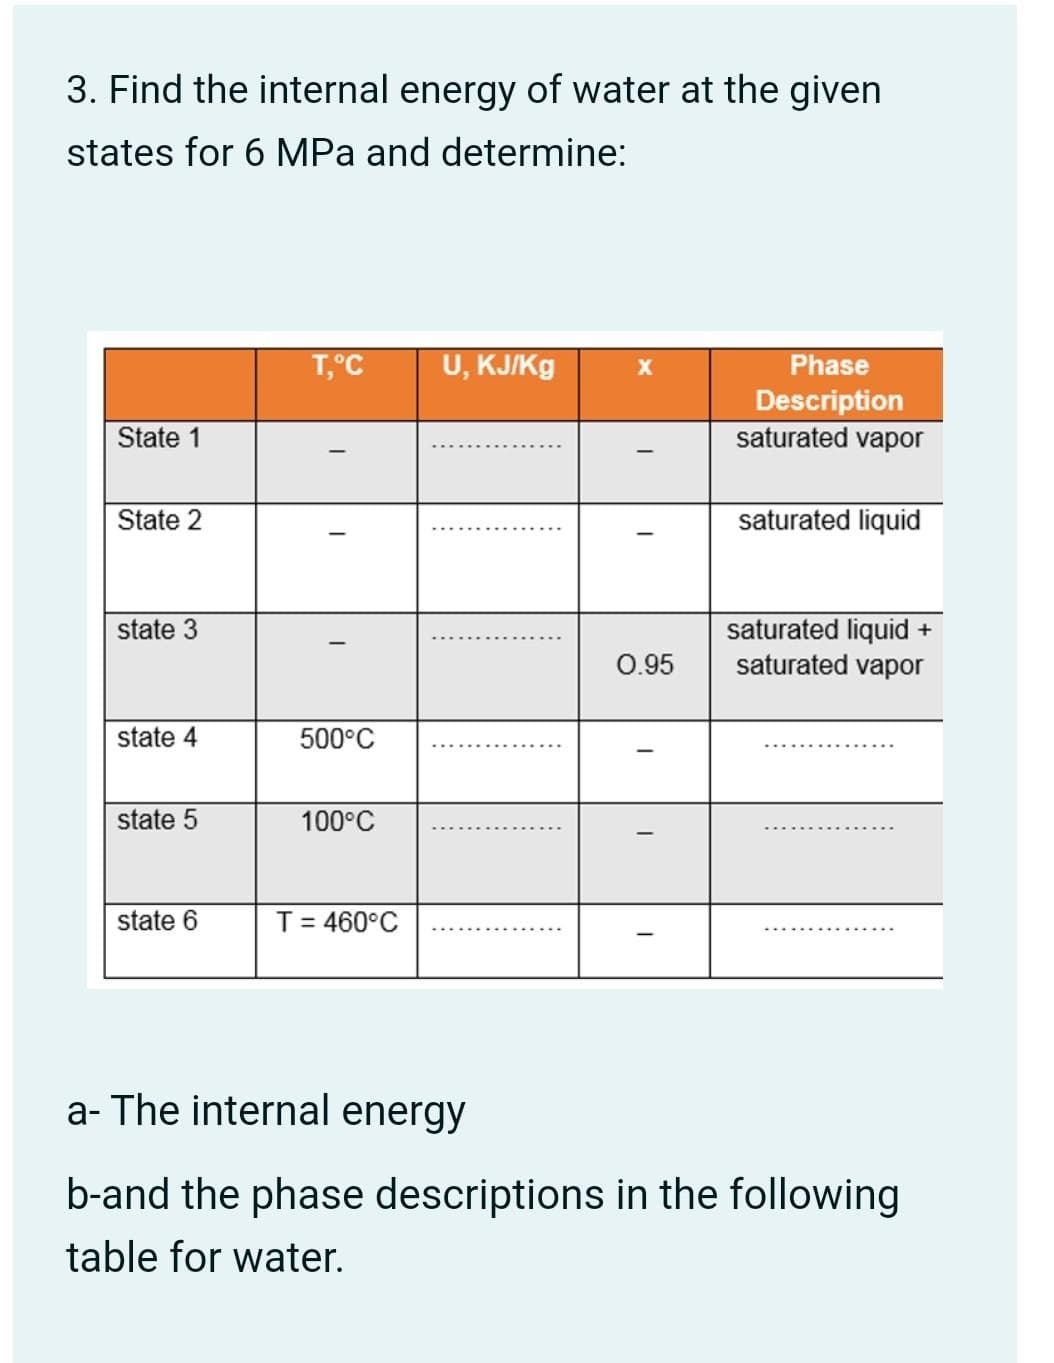 3. Find the internal energy of water at the given
states for 6 MPa and determine:
T,°C
U, KJ/Kg
Phase
Description
saturated vapor
State 1
State 2
saturated liquid
saturated liquid
saturated vapor
state 3
+
0.95
state 4
500°C
state 5
100°C
state 6
T= 460°C
a- The internal energy
b-and the phase descriptions in the following
table for water.
